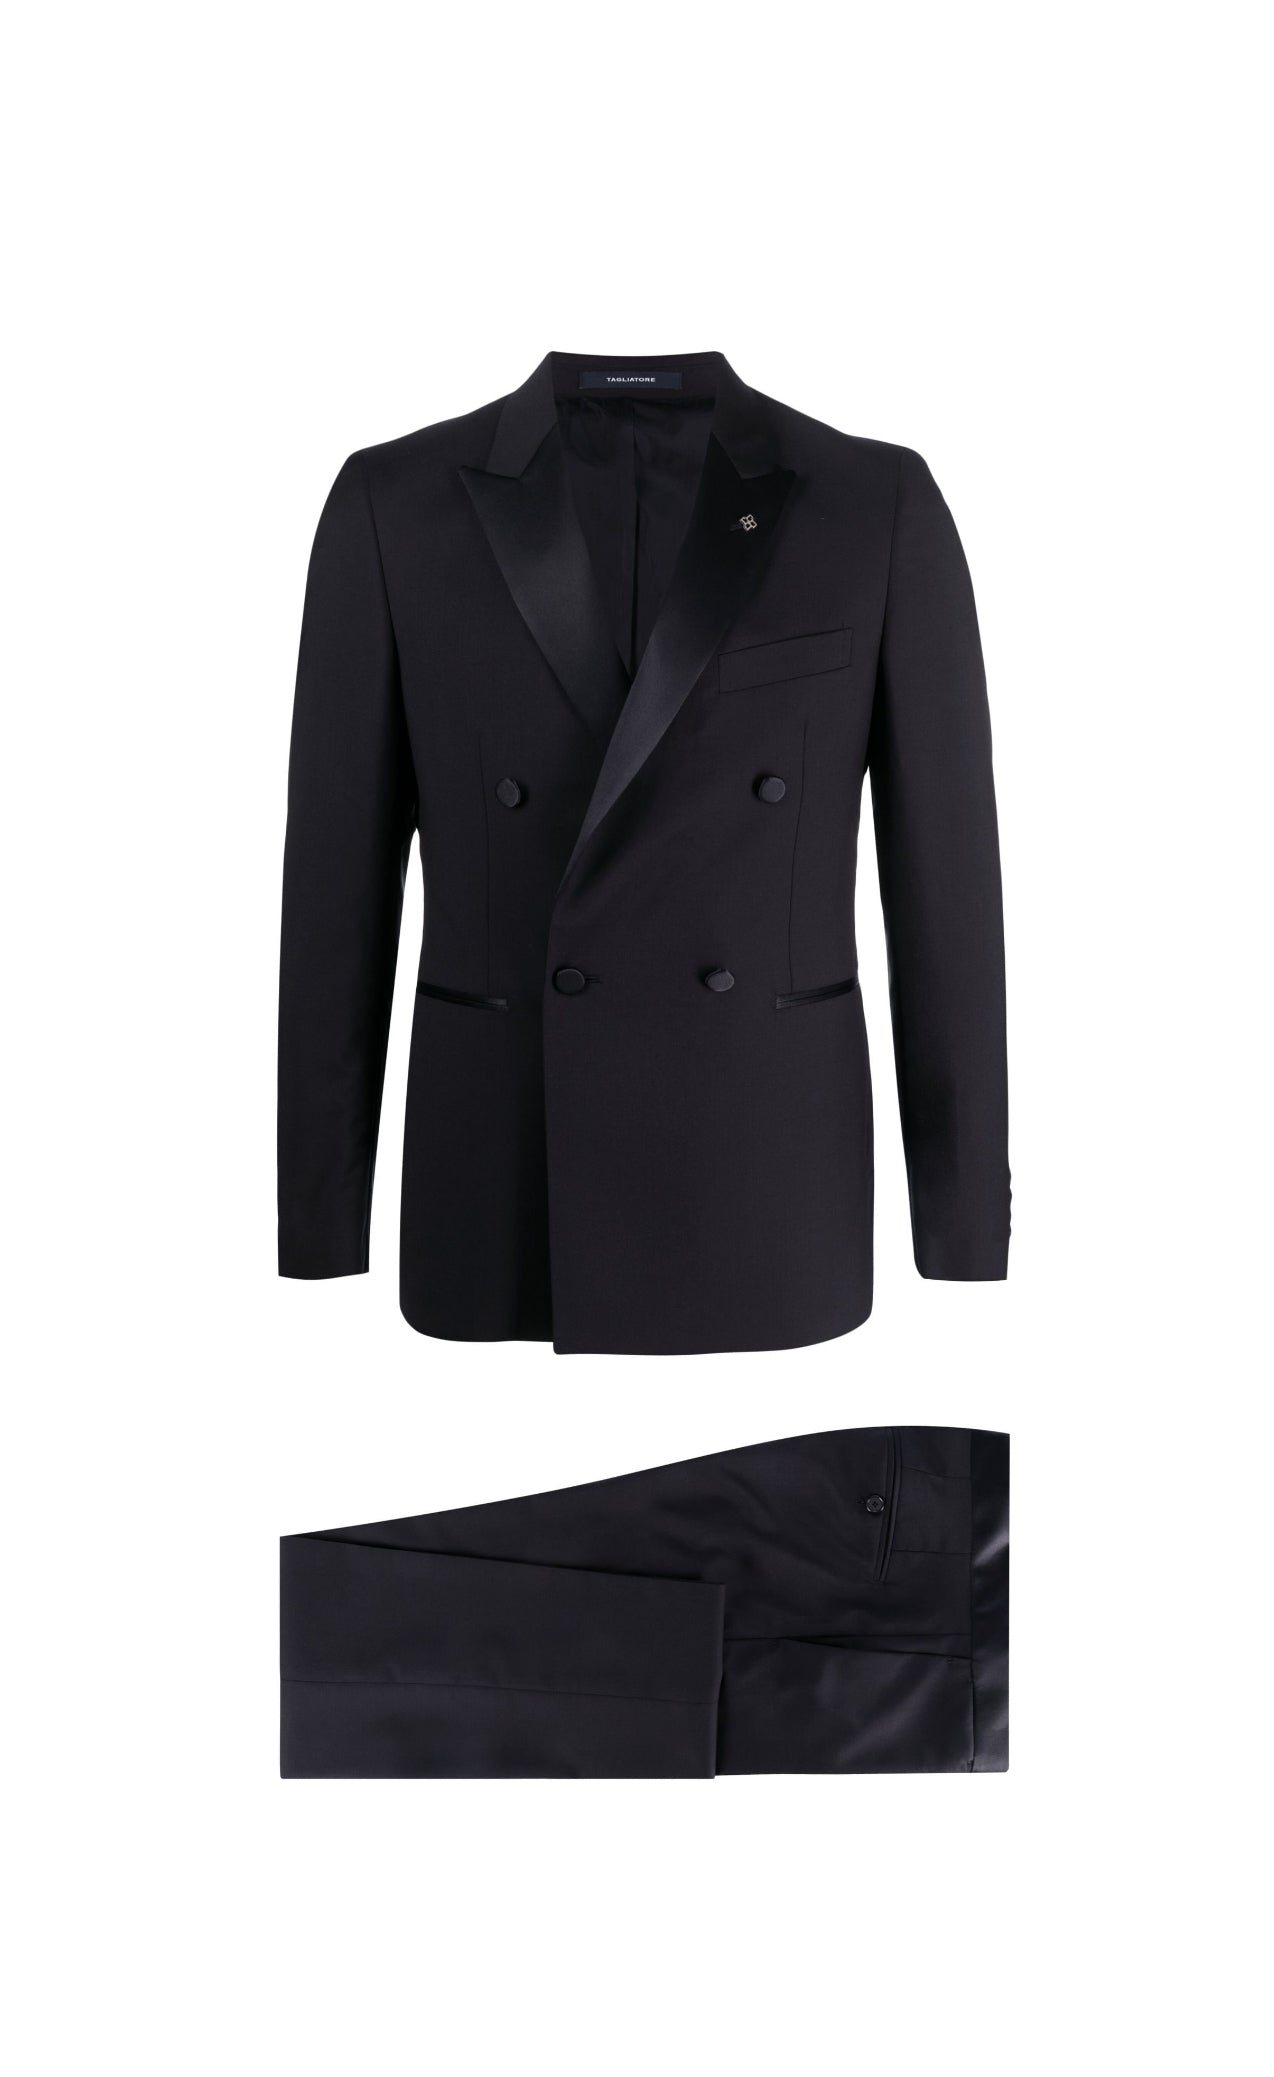 Costum Tagliatore for rent - double-breasted dinner suit - midnight blue